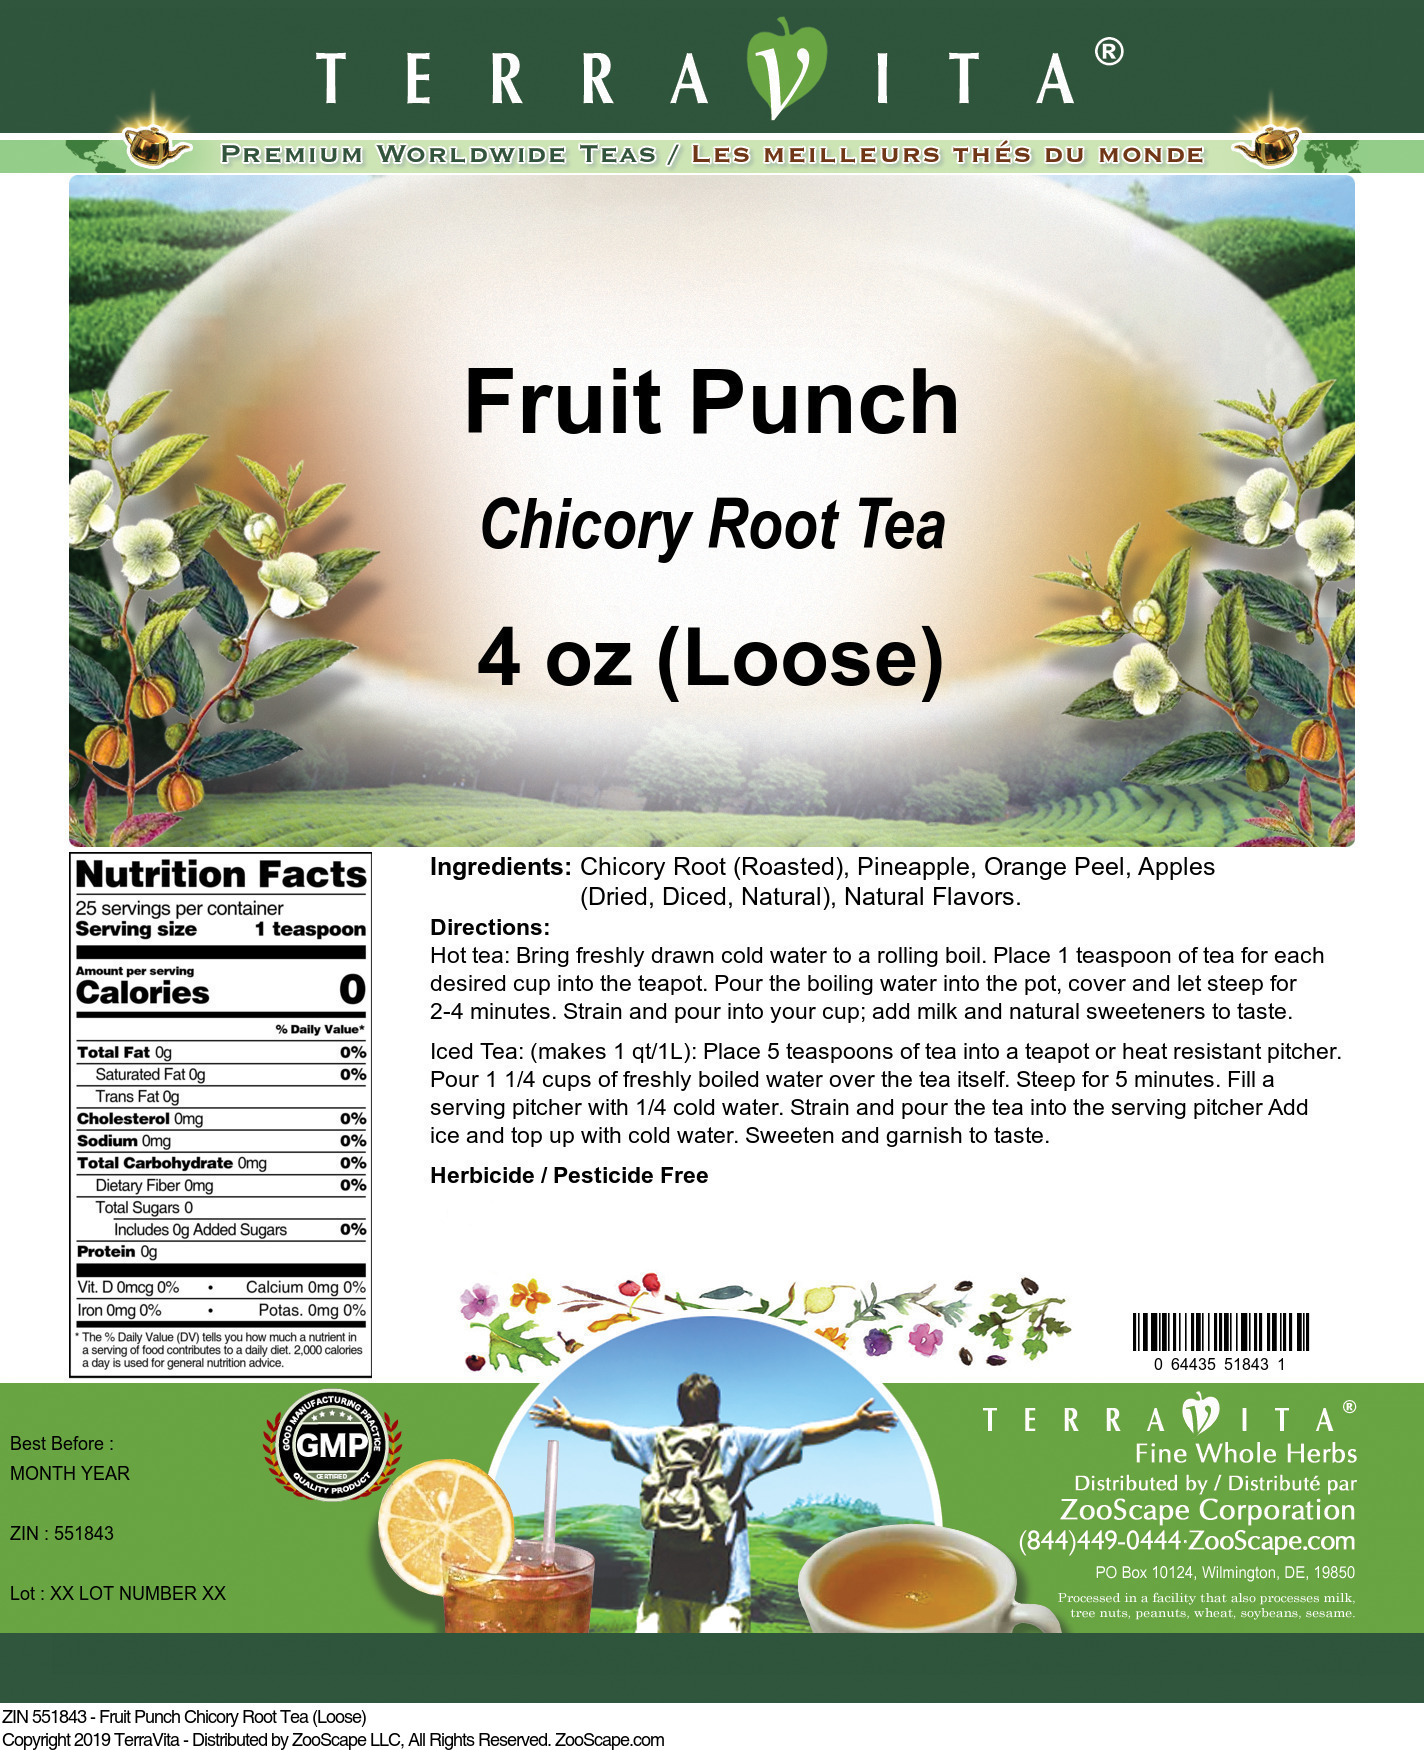 Fruit Punch Chicory Root Tea (Loose) - Label